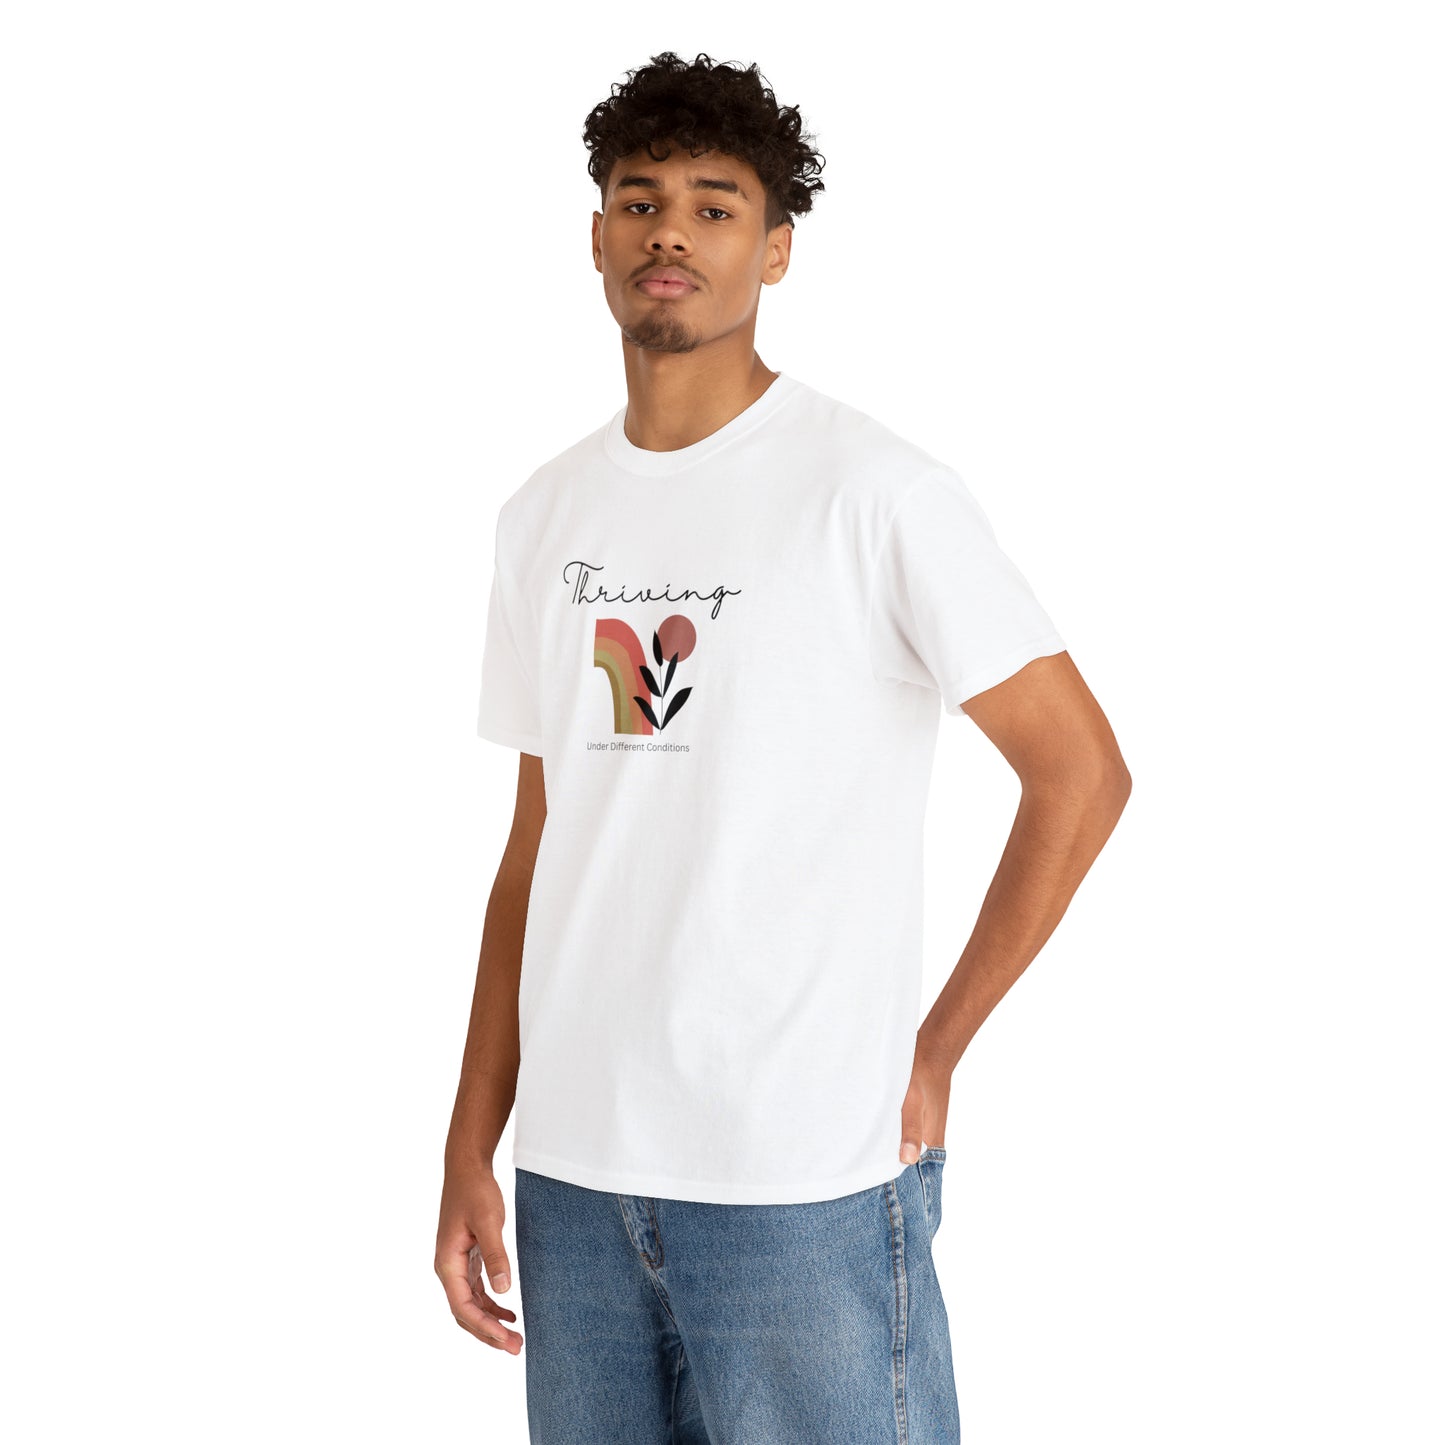 Thriving Under Different Conditions T-shirt